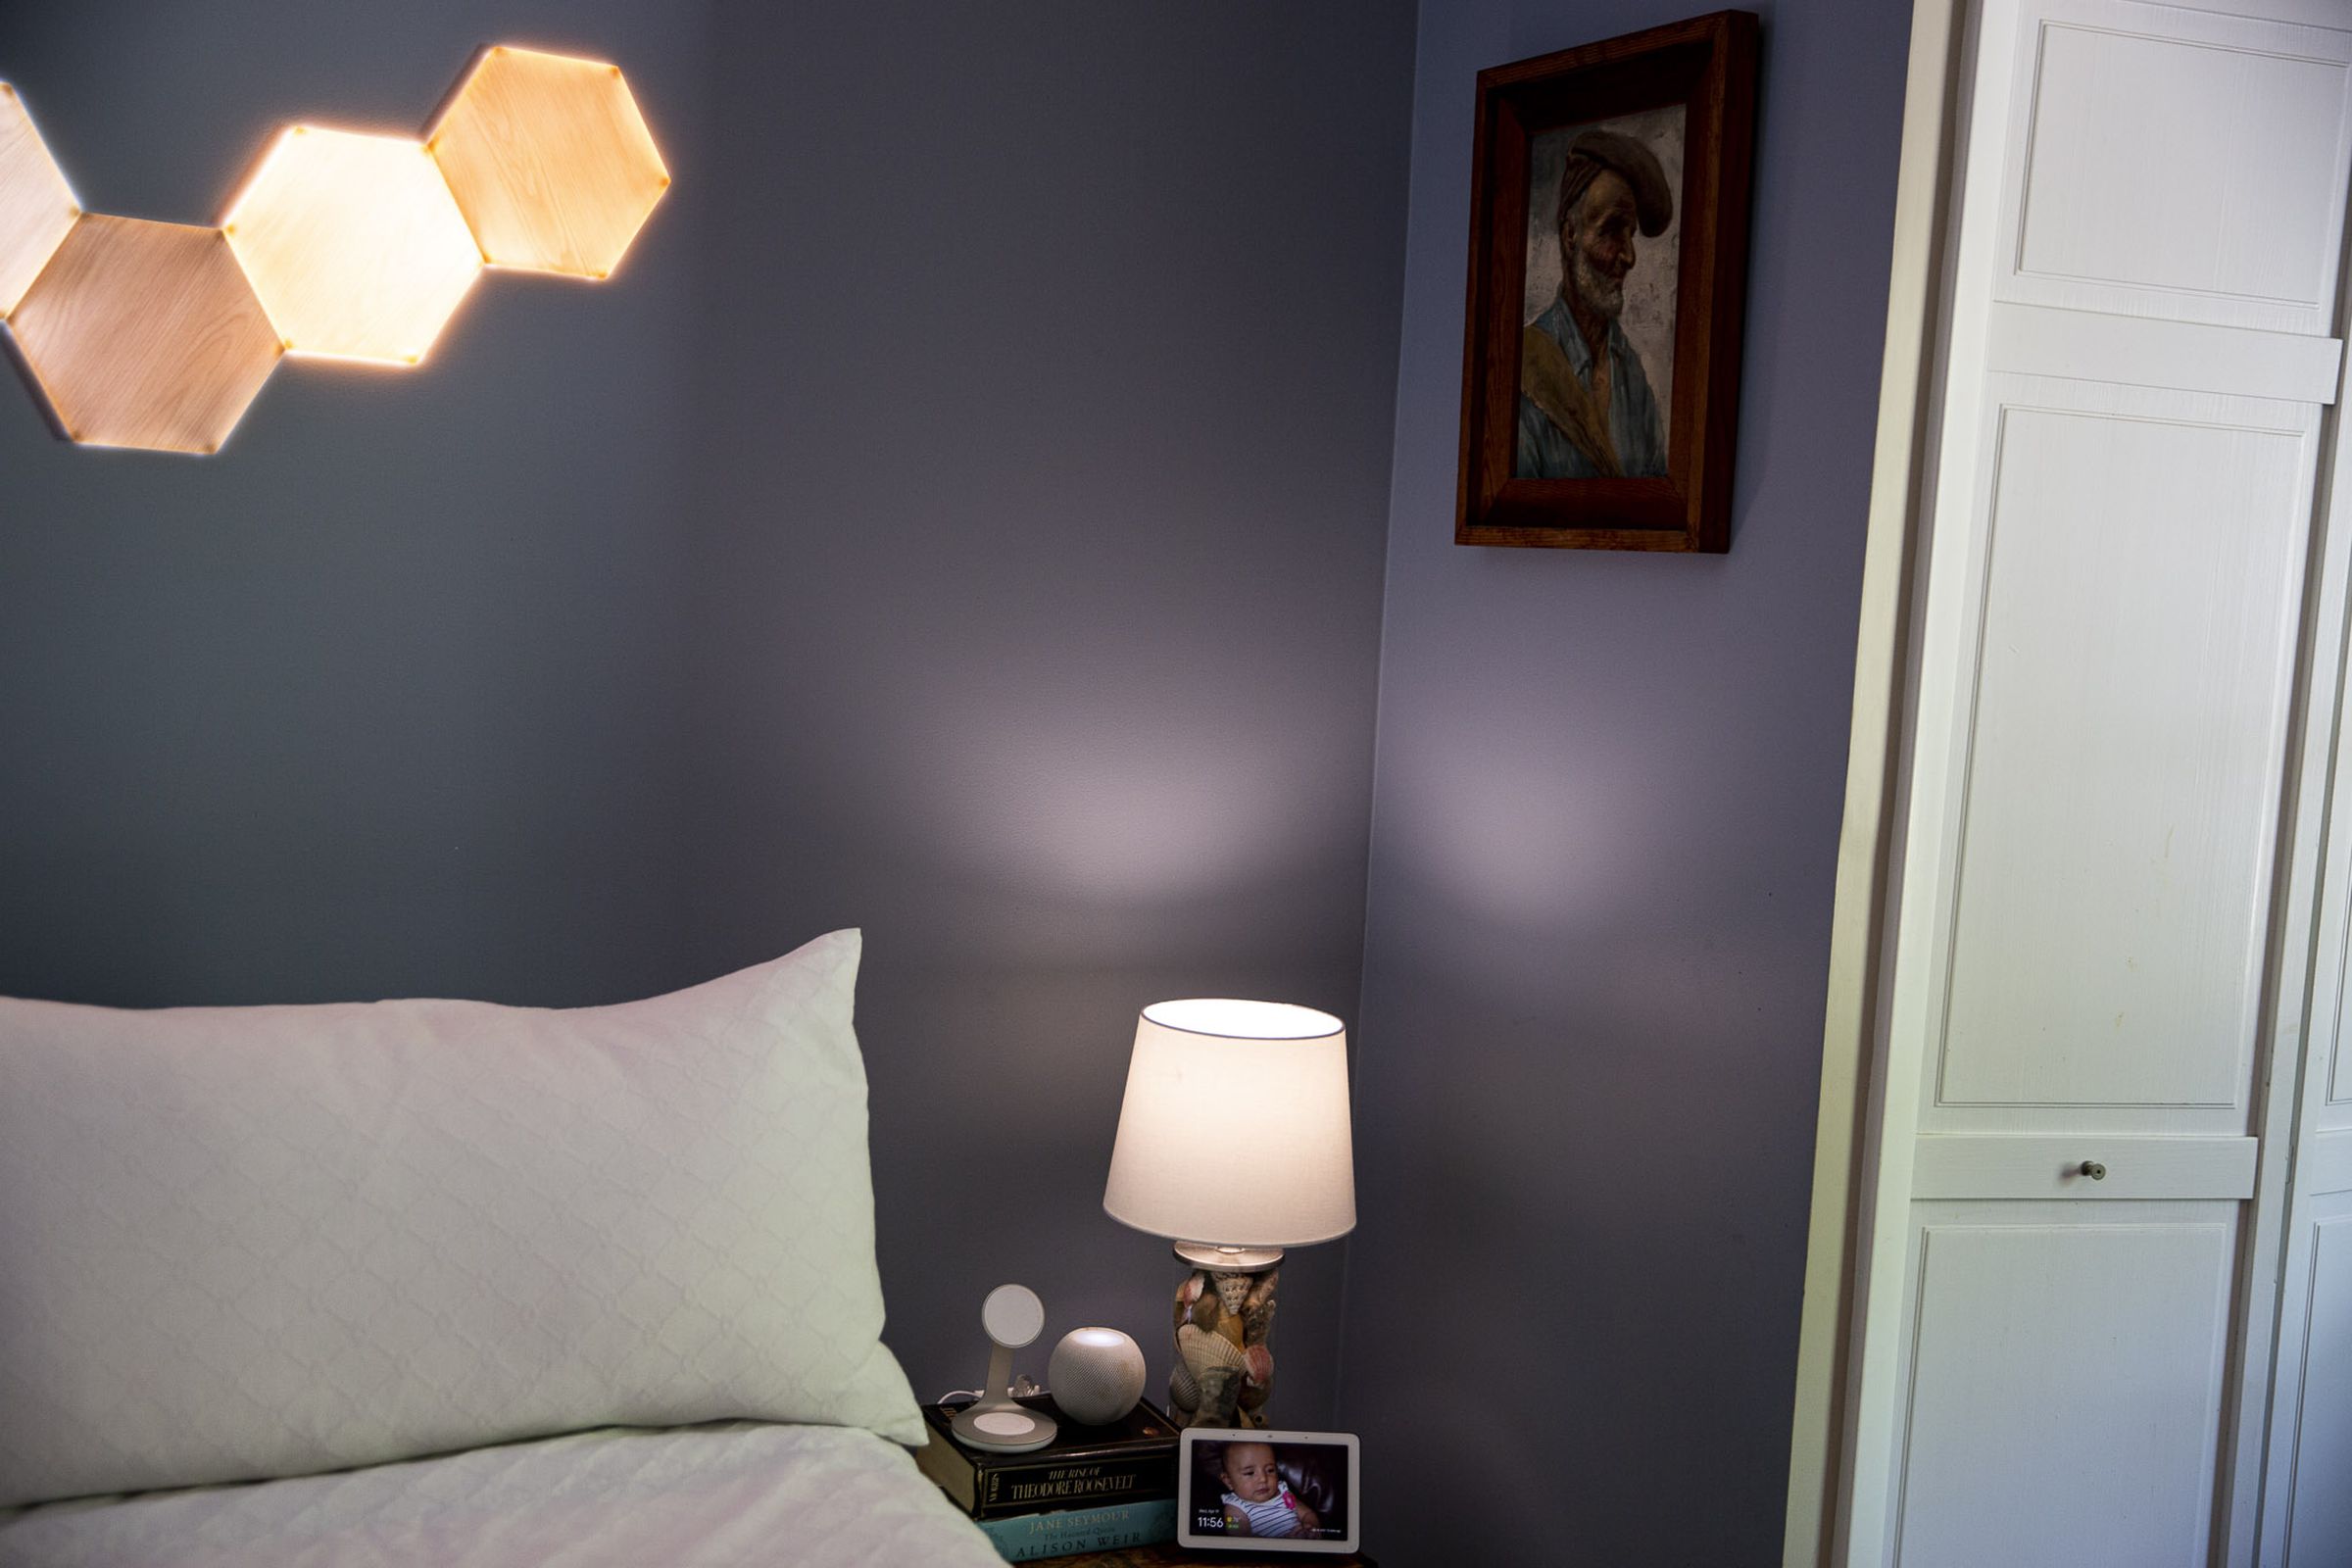 A lamp on a bedside table next to a bed with light panels on the wall behind it,